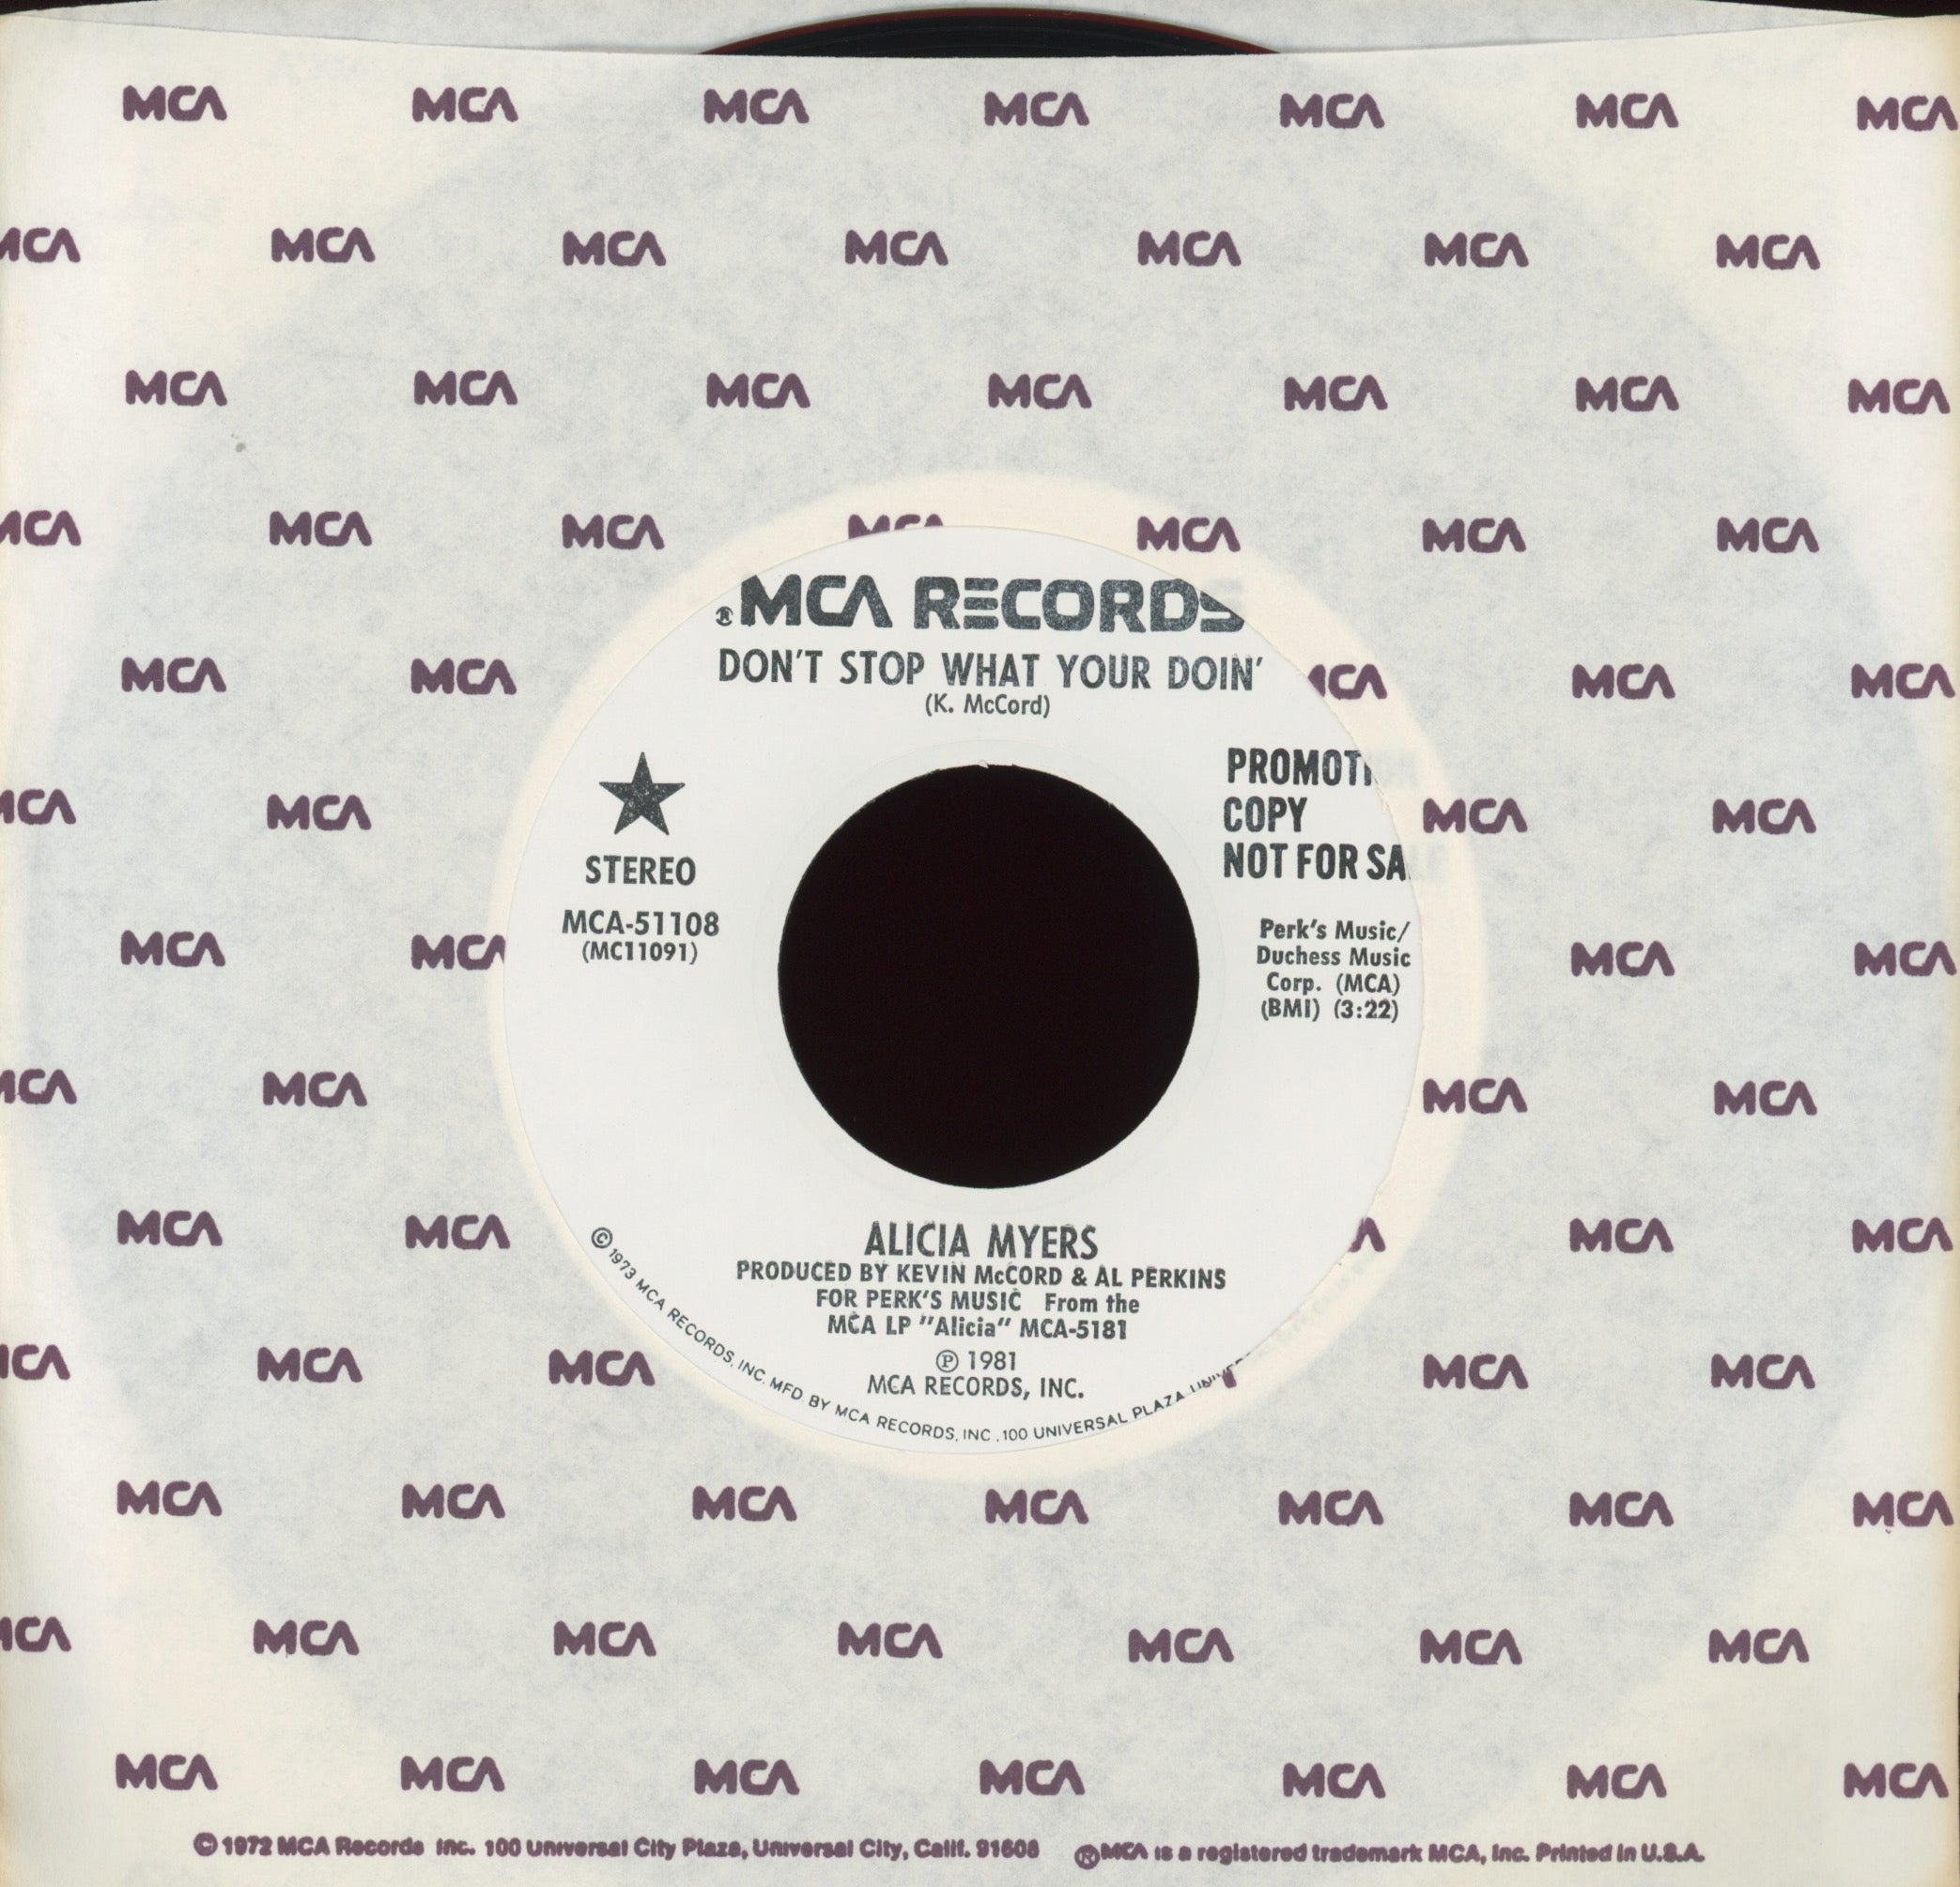 Alicia Myers - Don't Stop What Your Doin' on MCA Promo